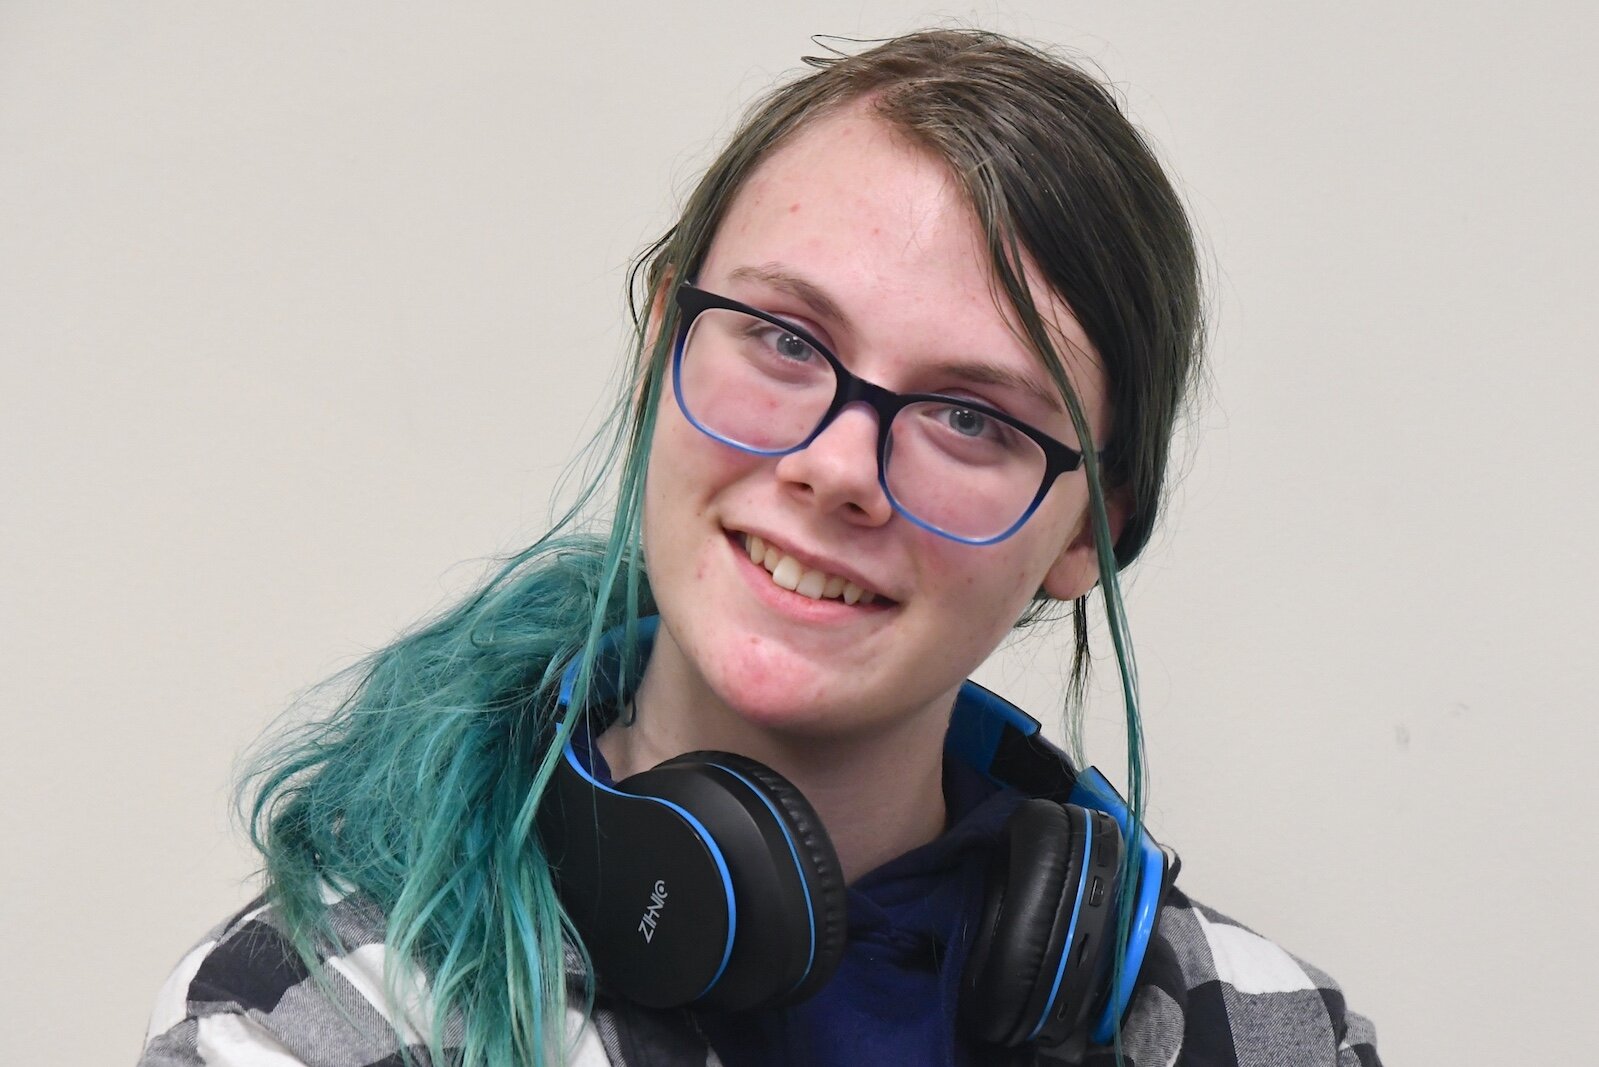 Athena McCarthy, 15, Voices of Youth Battle Creek Artist